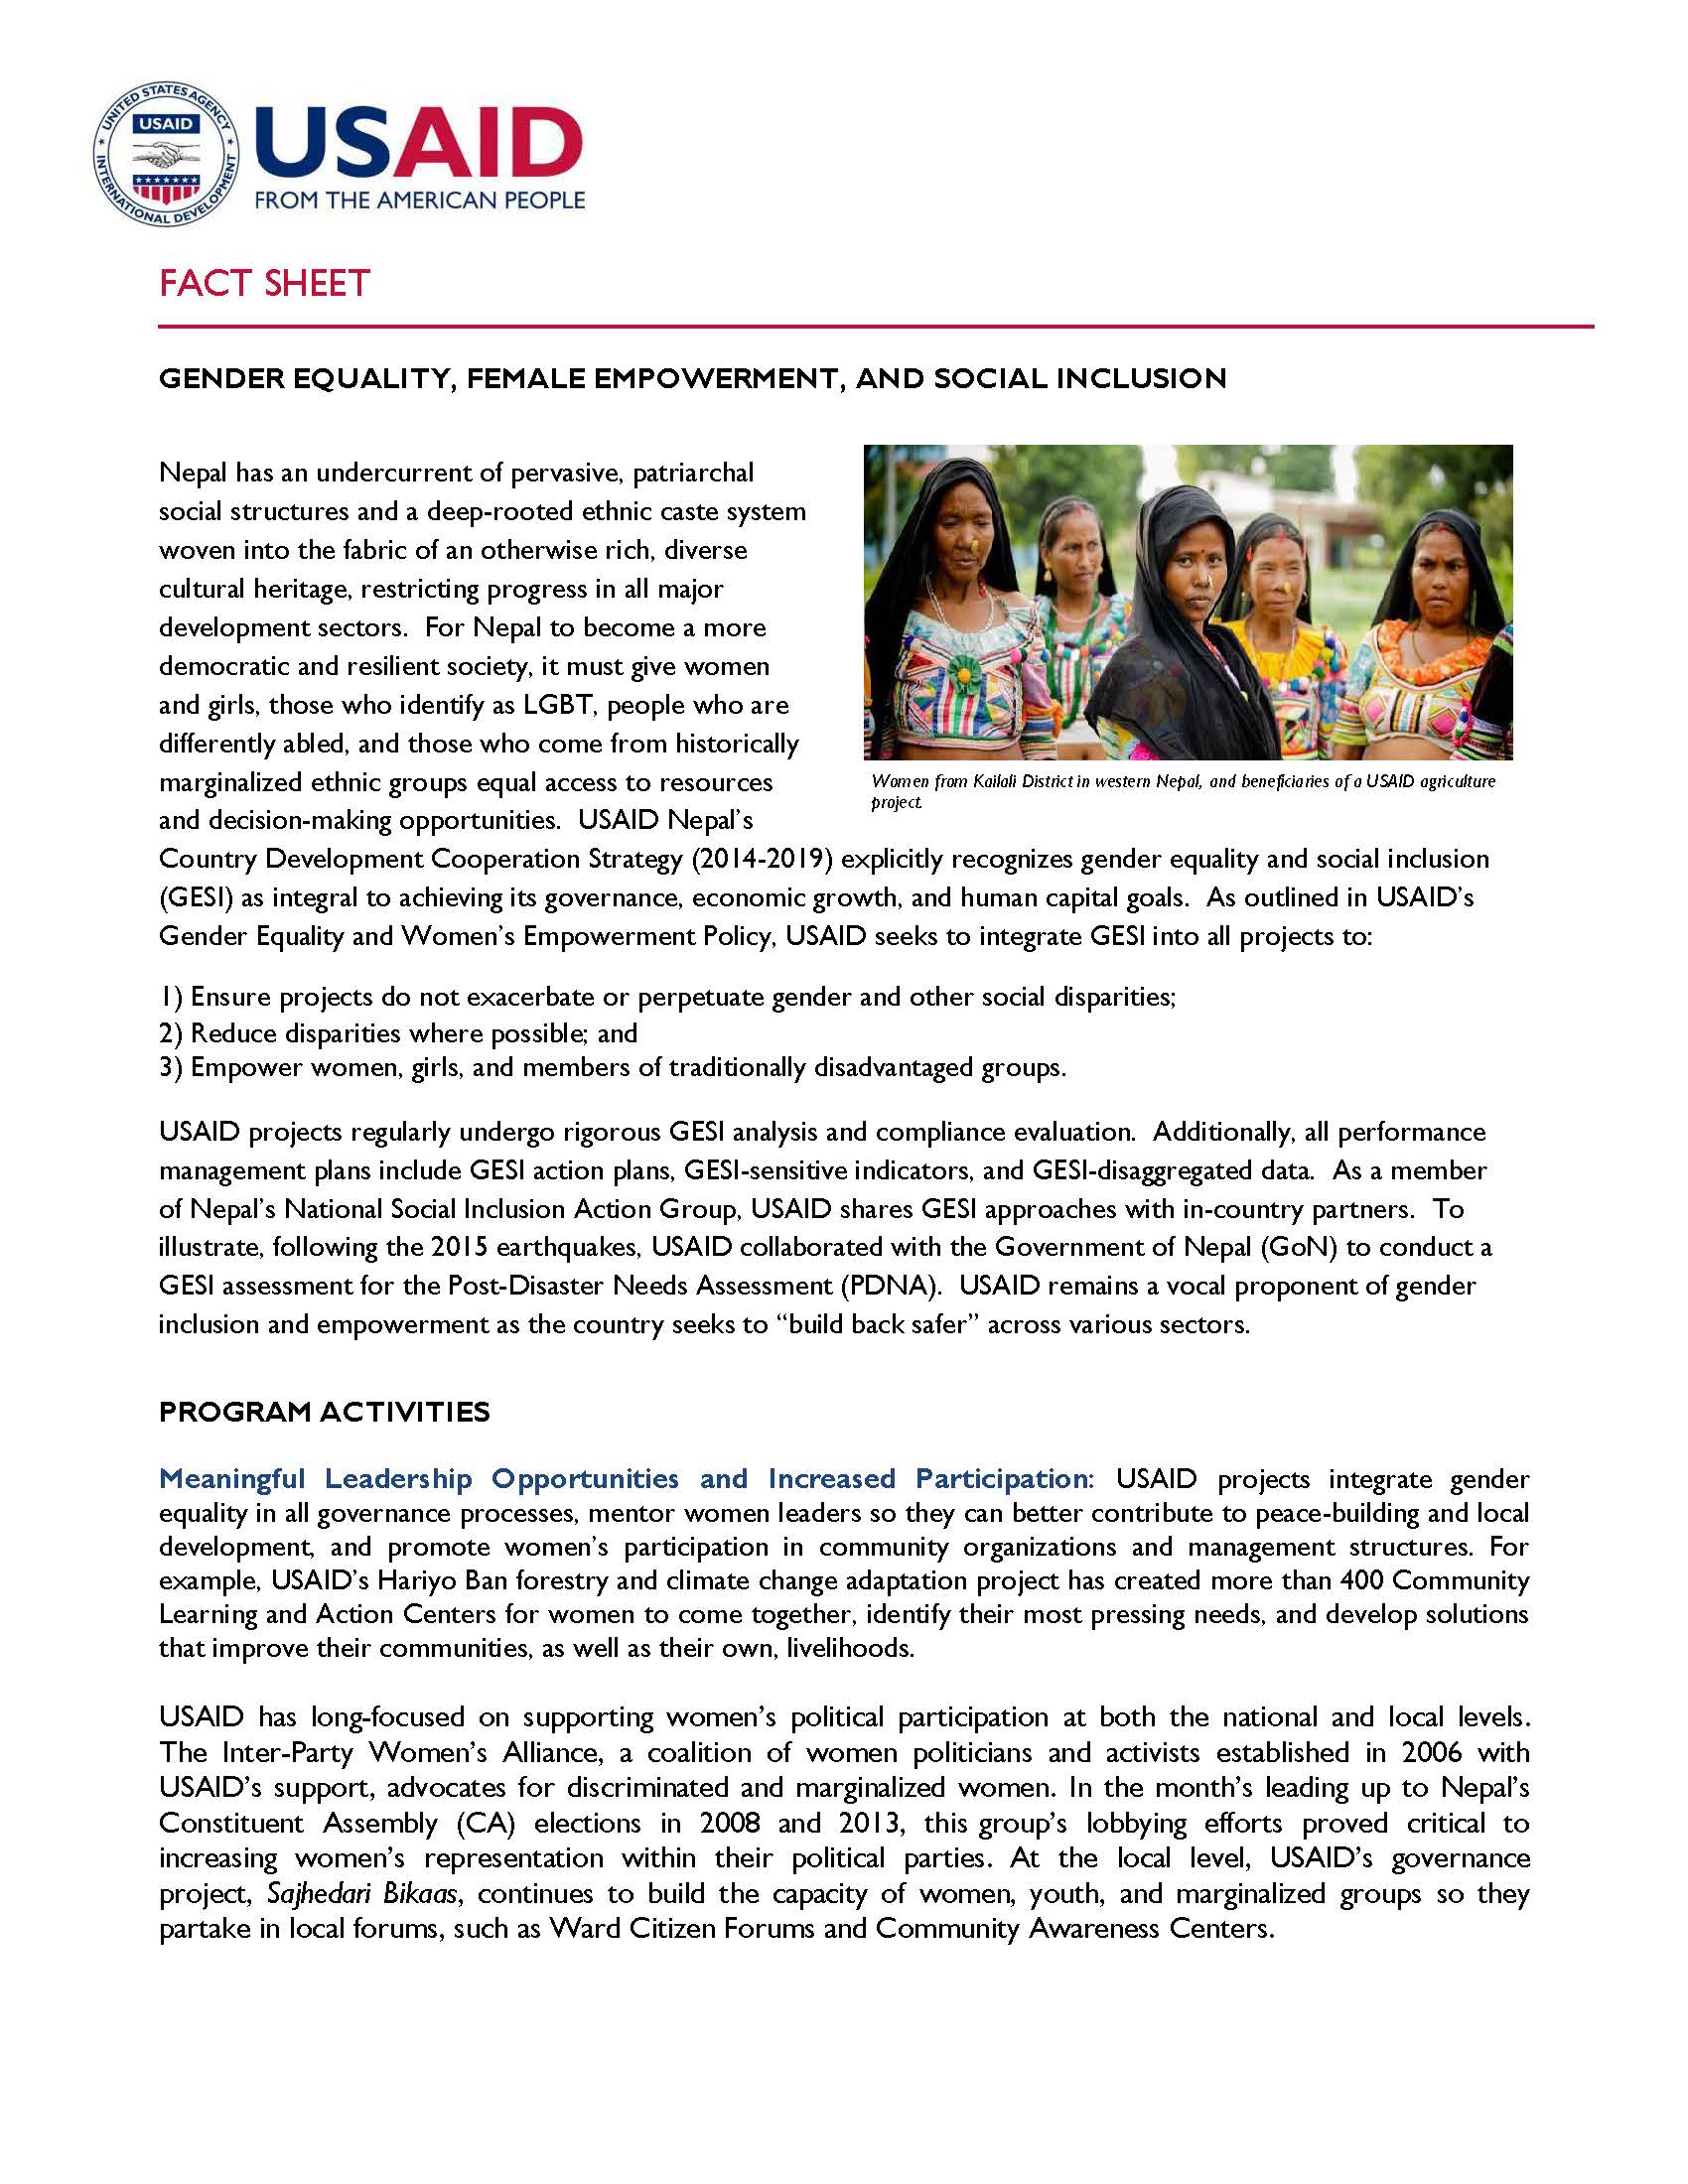 Fact Sheet: Gender Equality, Female Empowerment, and Social Inclusion